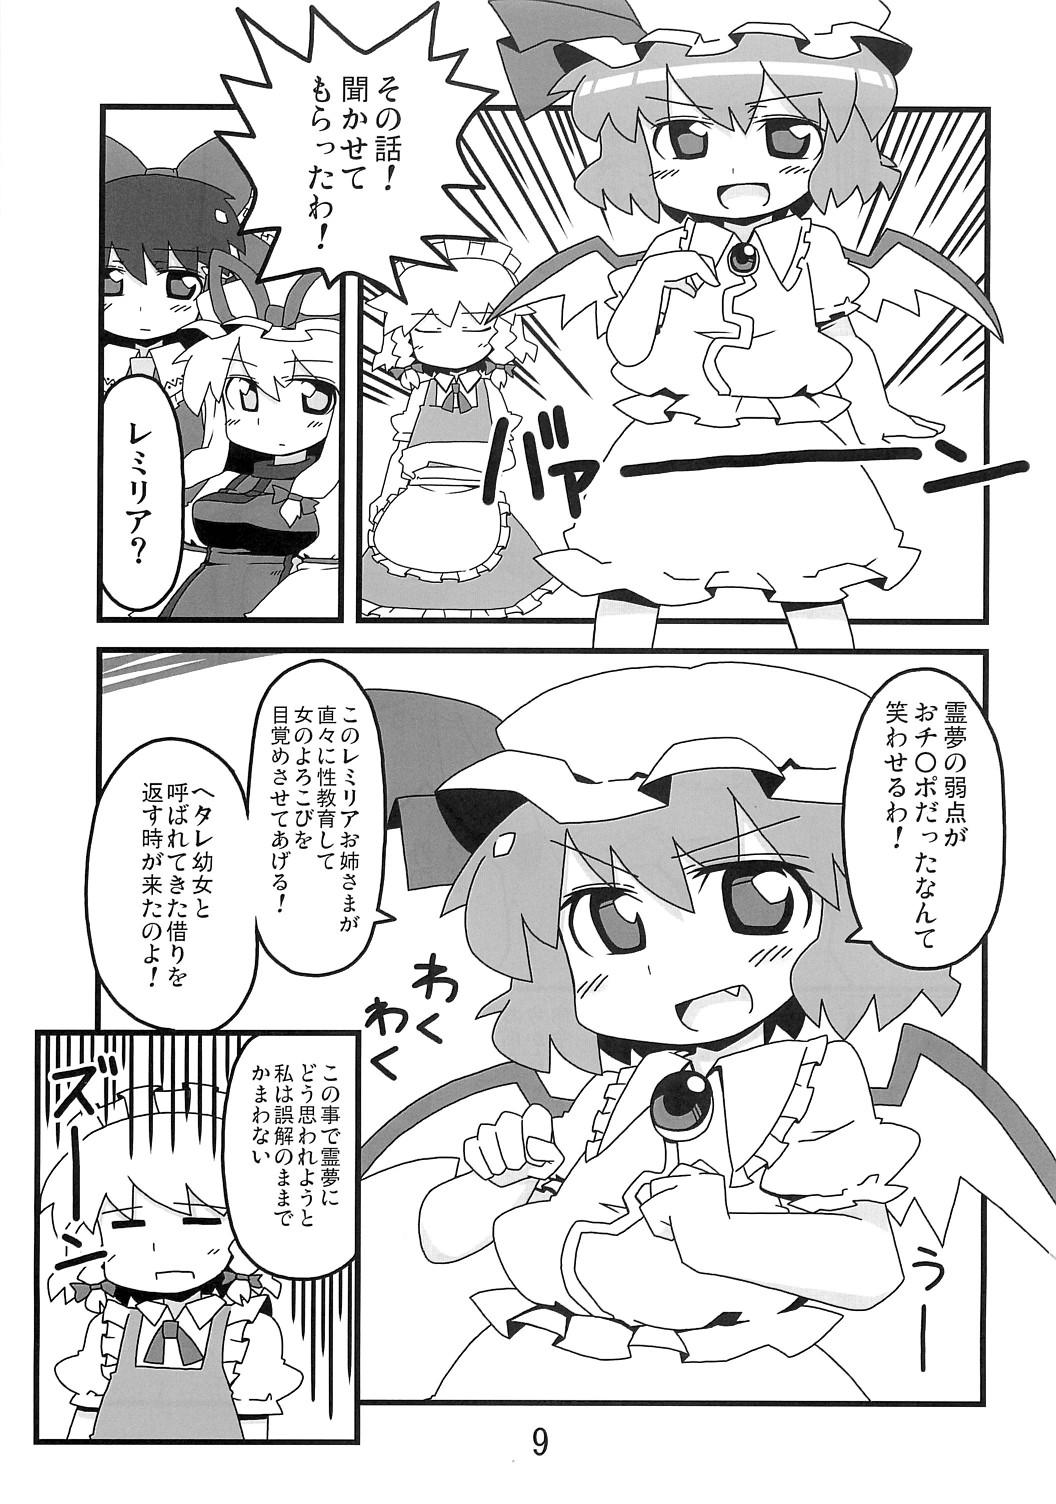 Boy Fuck Girl 東方豊年祭 - Touhou project Spank - Page 8